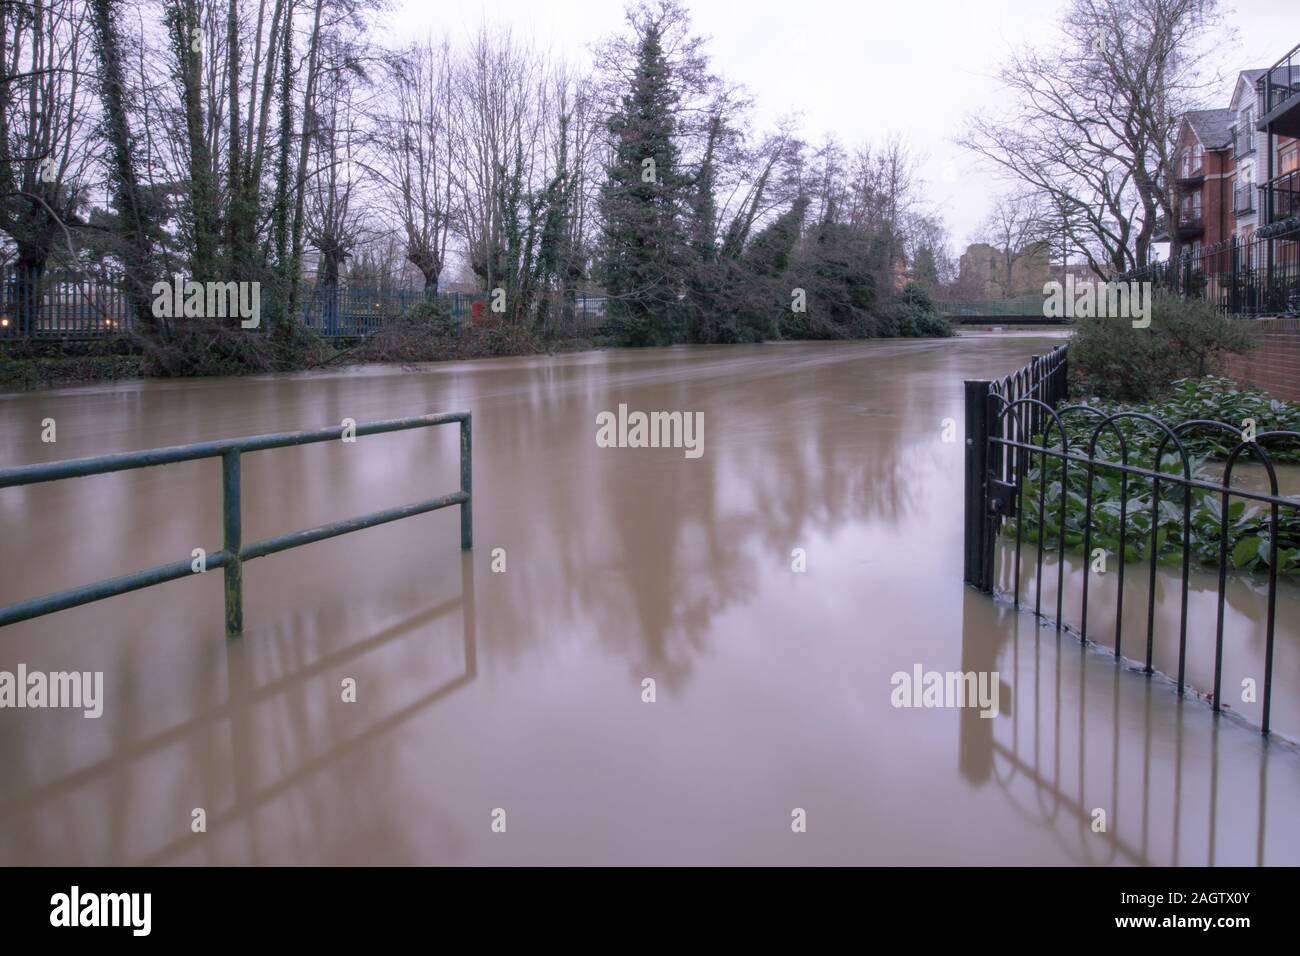 Tonbridge, Kent,United Kingdom. 21 December, 2019. Heavy rainfall has lead to the river Medway bursting its banks in places flooding areas of Tonbridg Stock Photo